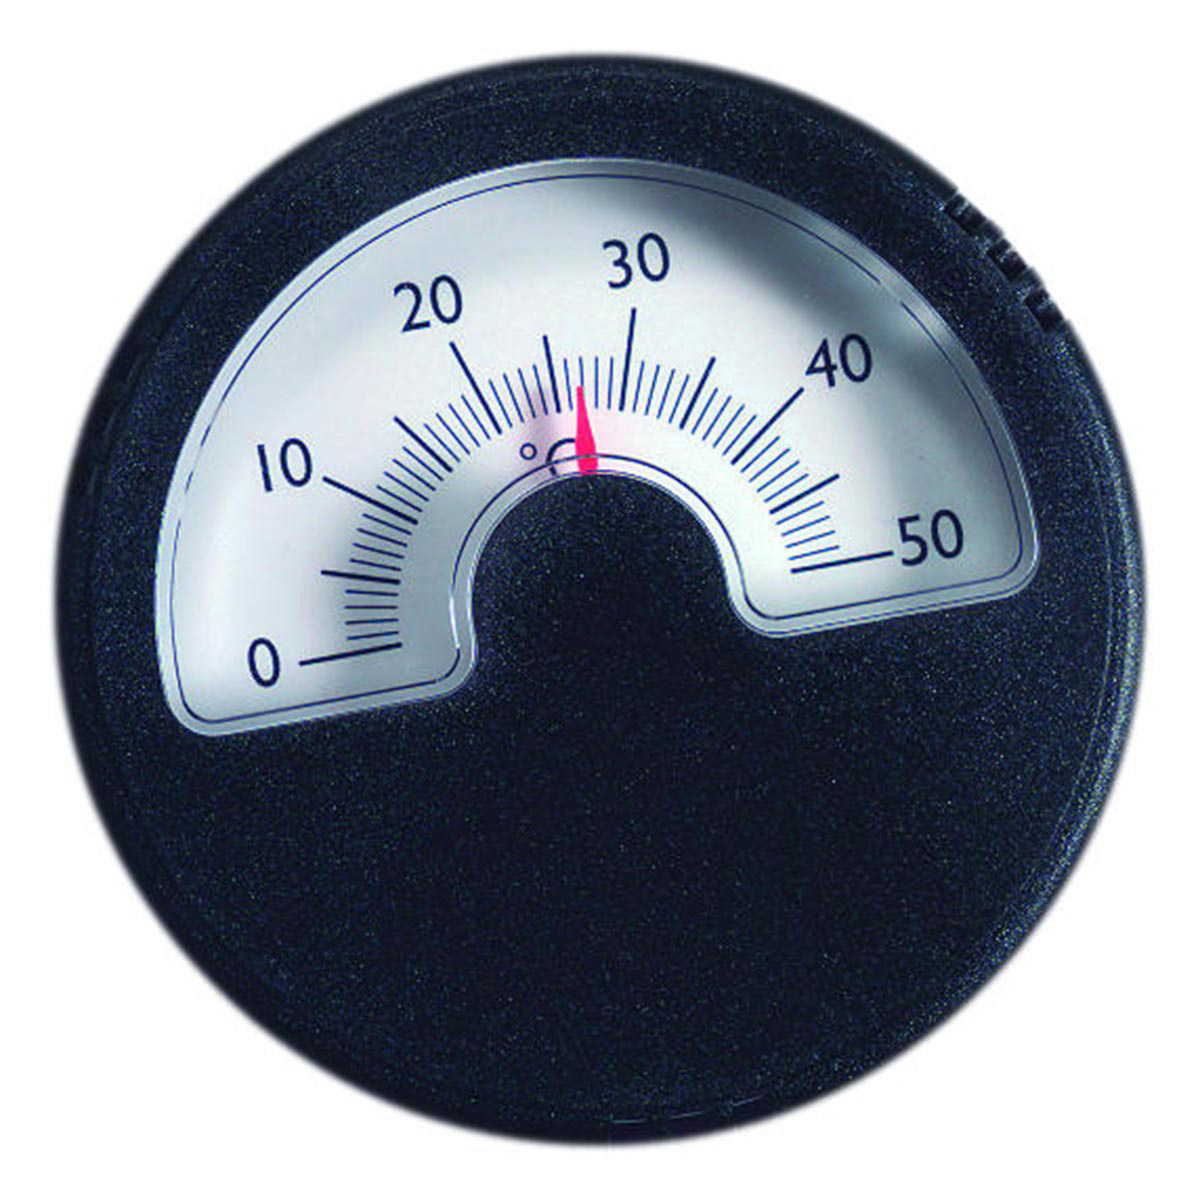 Analogue outdoor thermometer